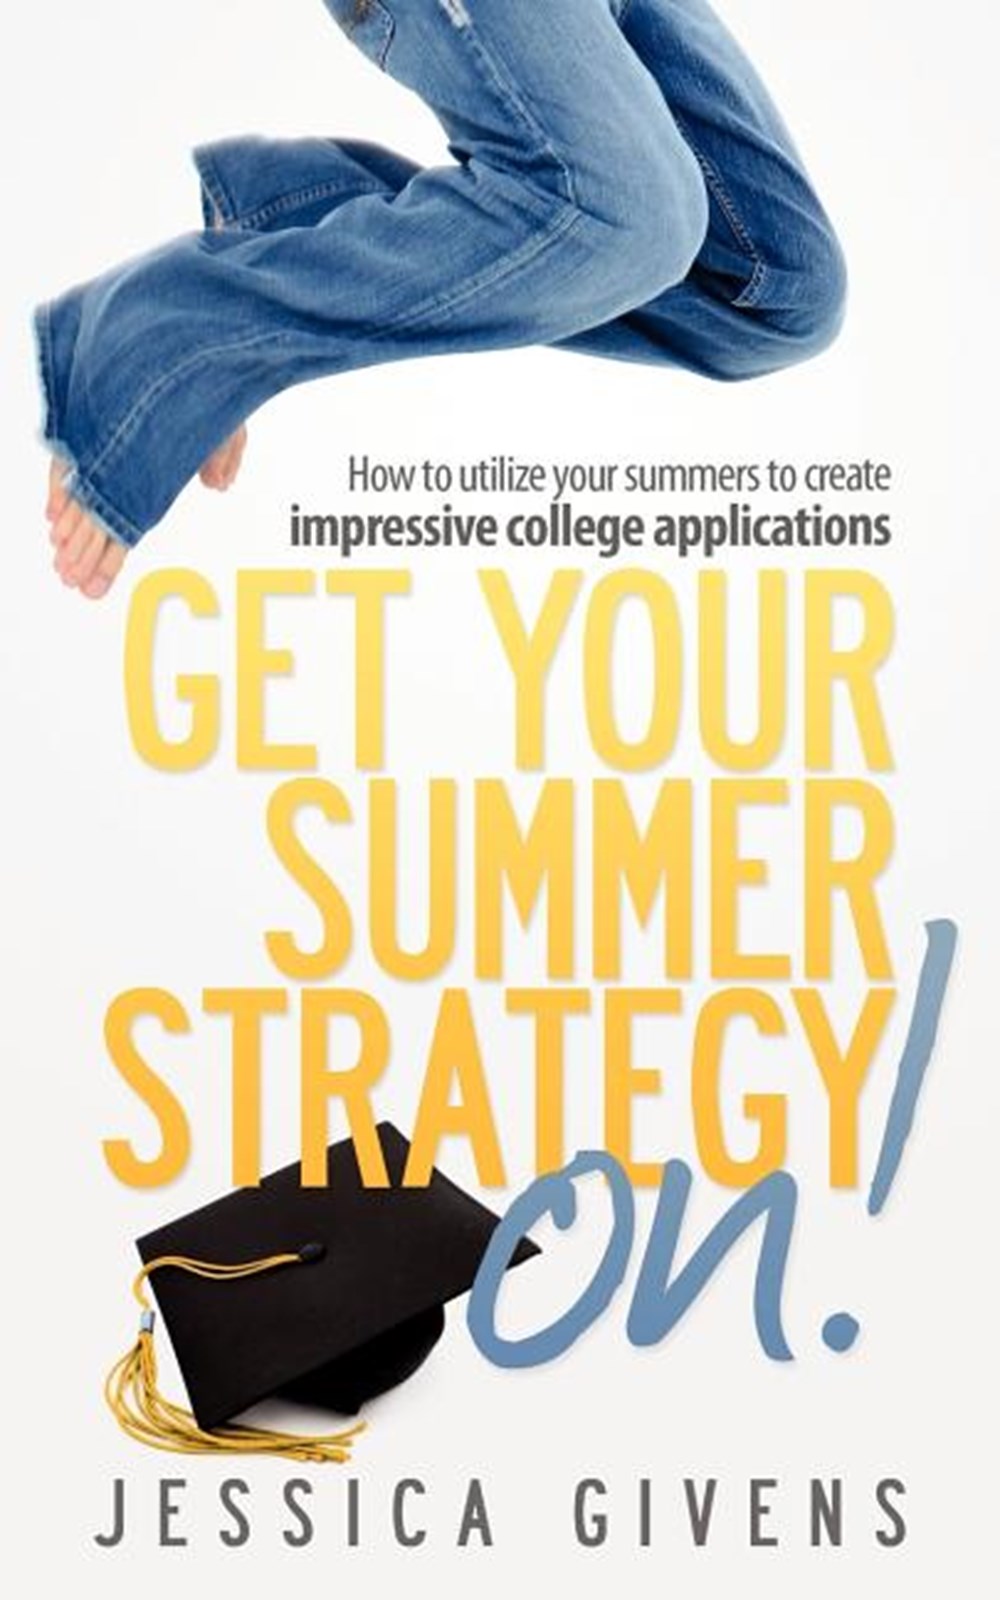 Get Your Summer Strategy On! 2012 Edition